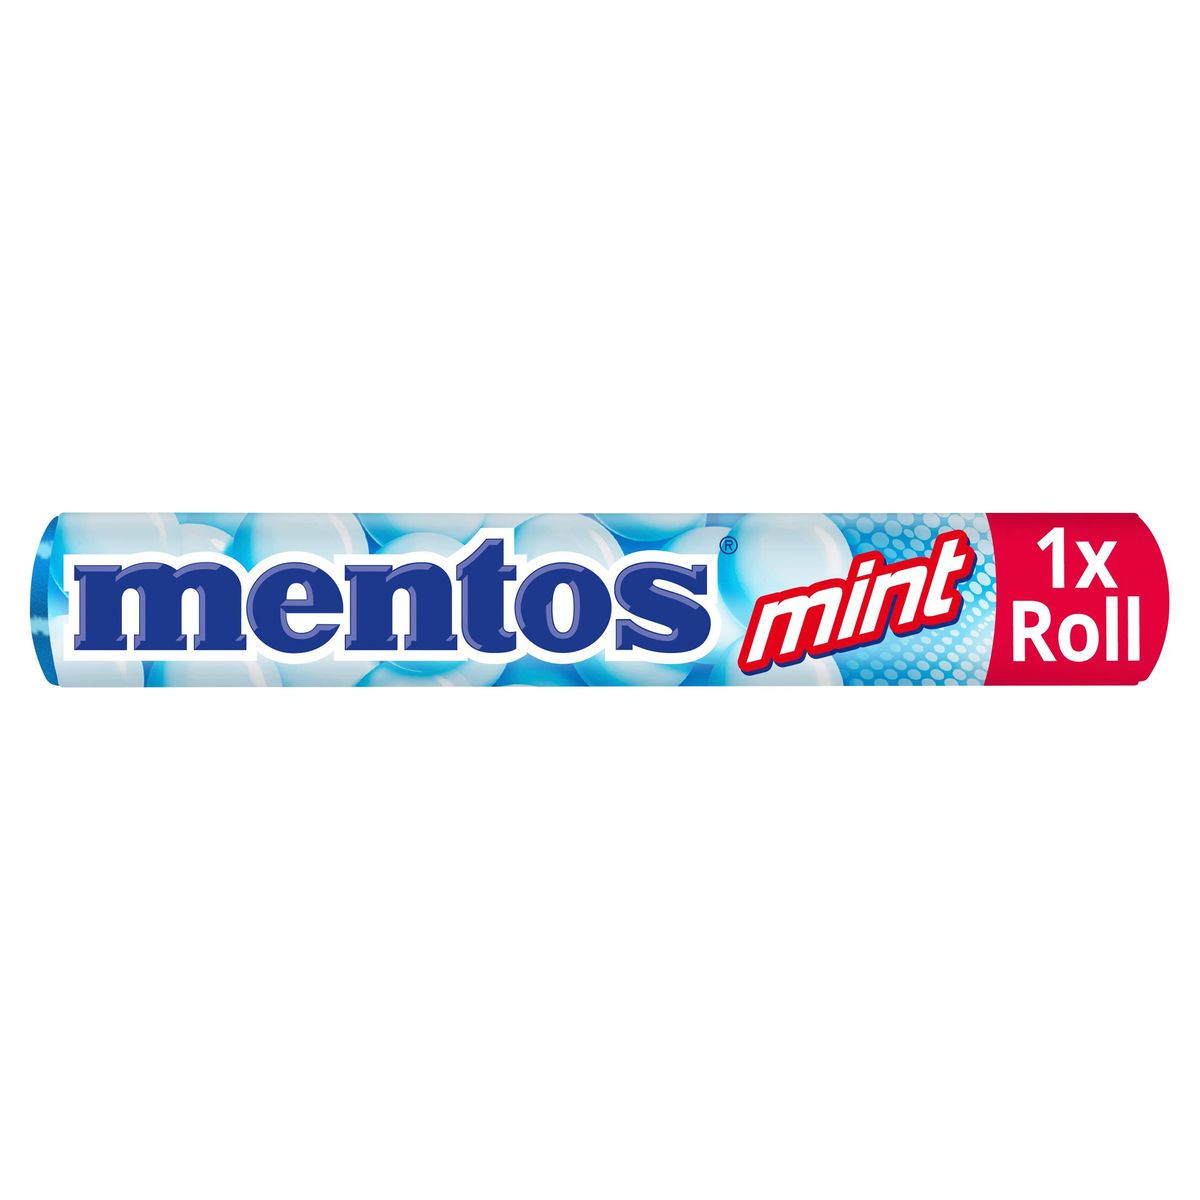 Mentos Chewy Dragees Mint 37.5 g